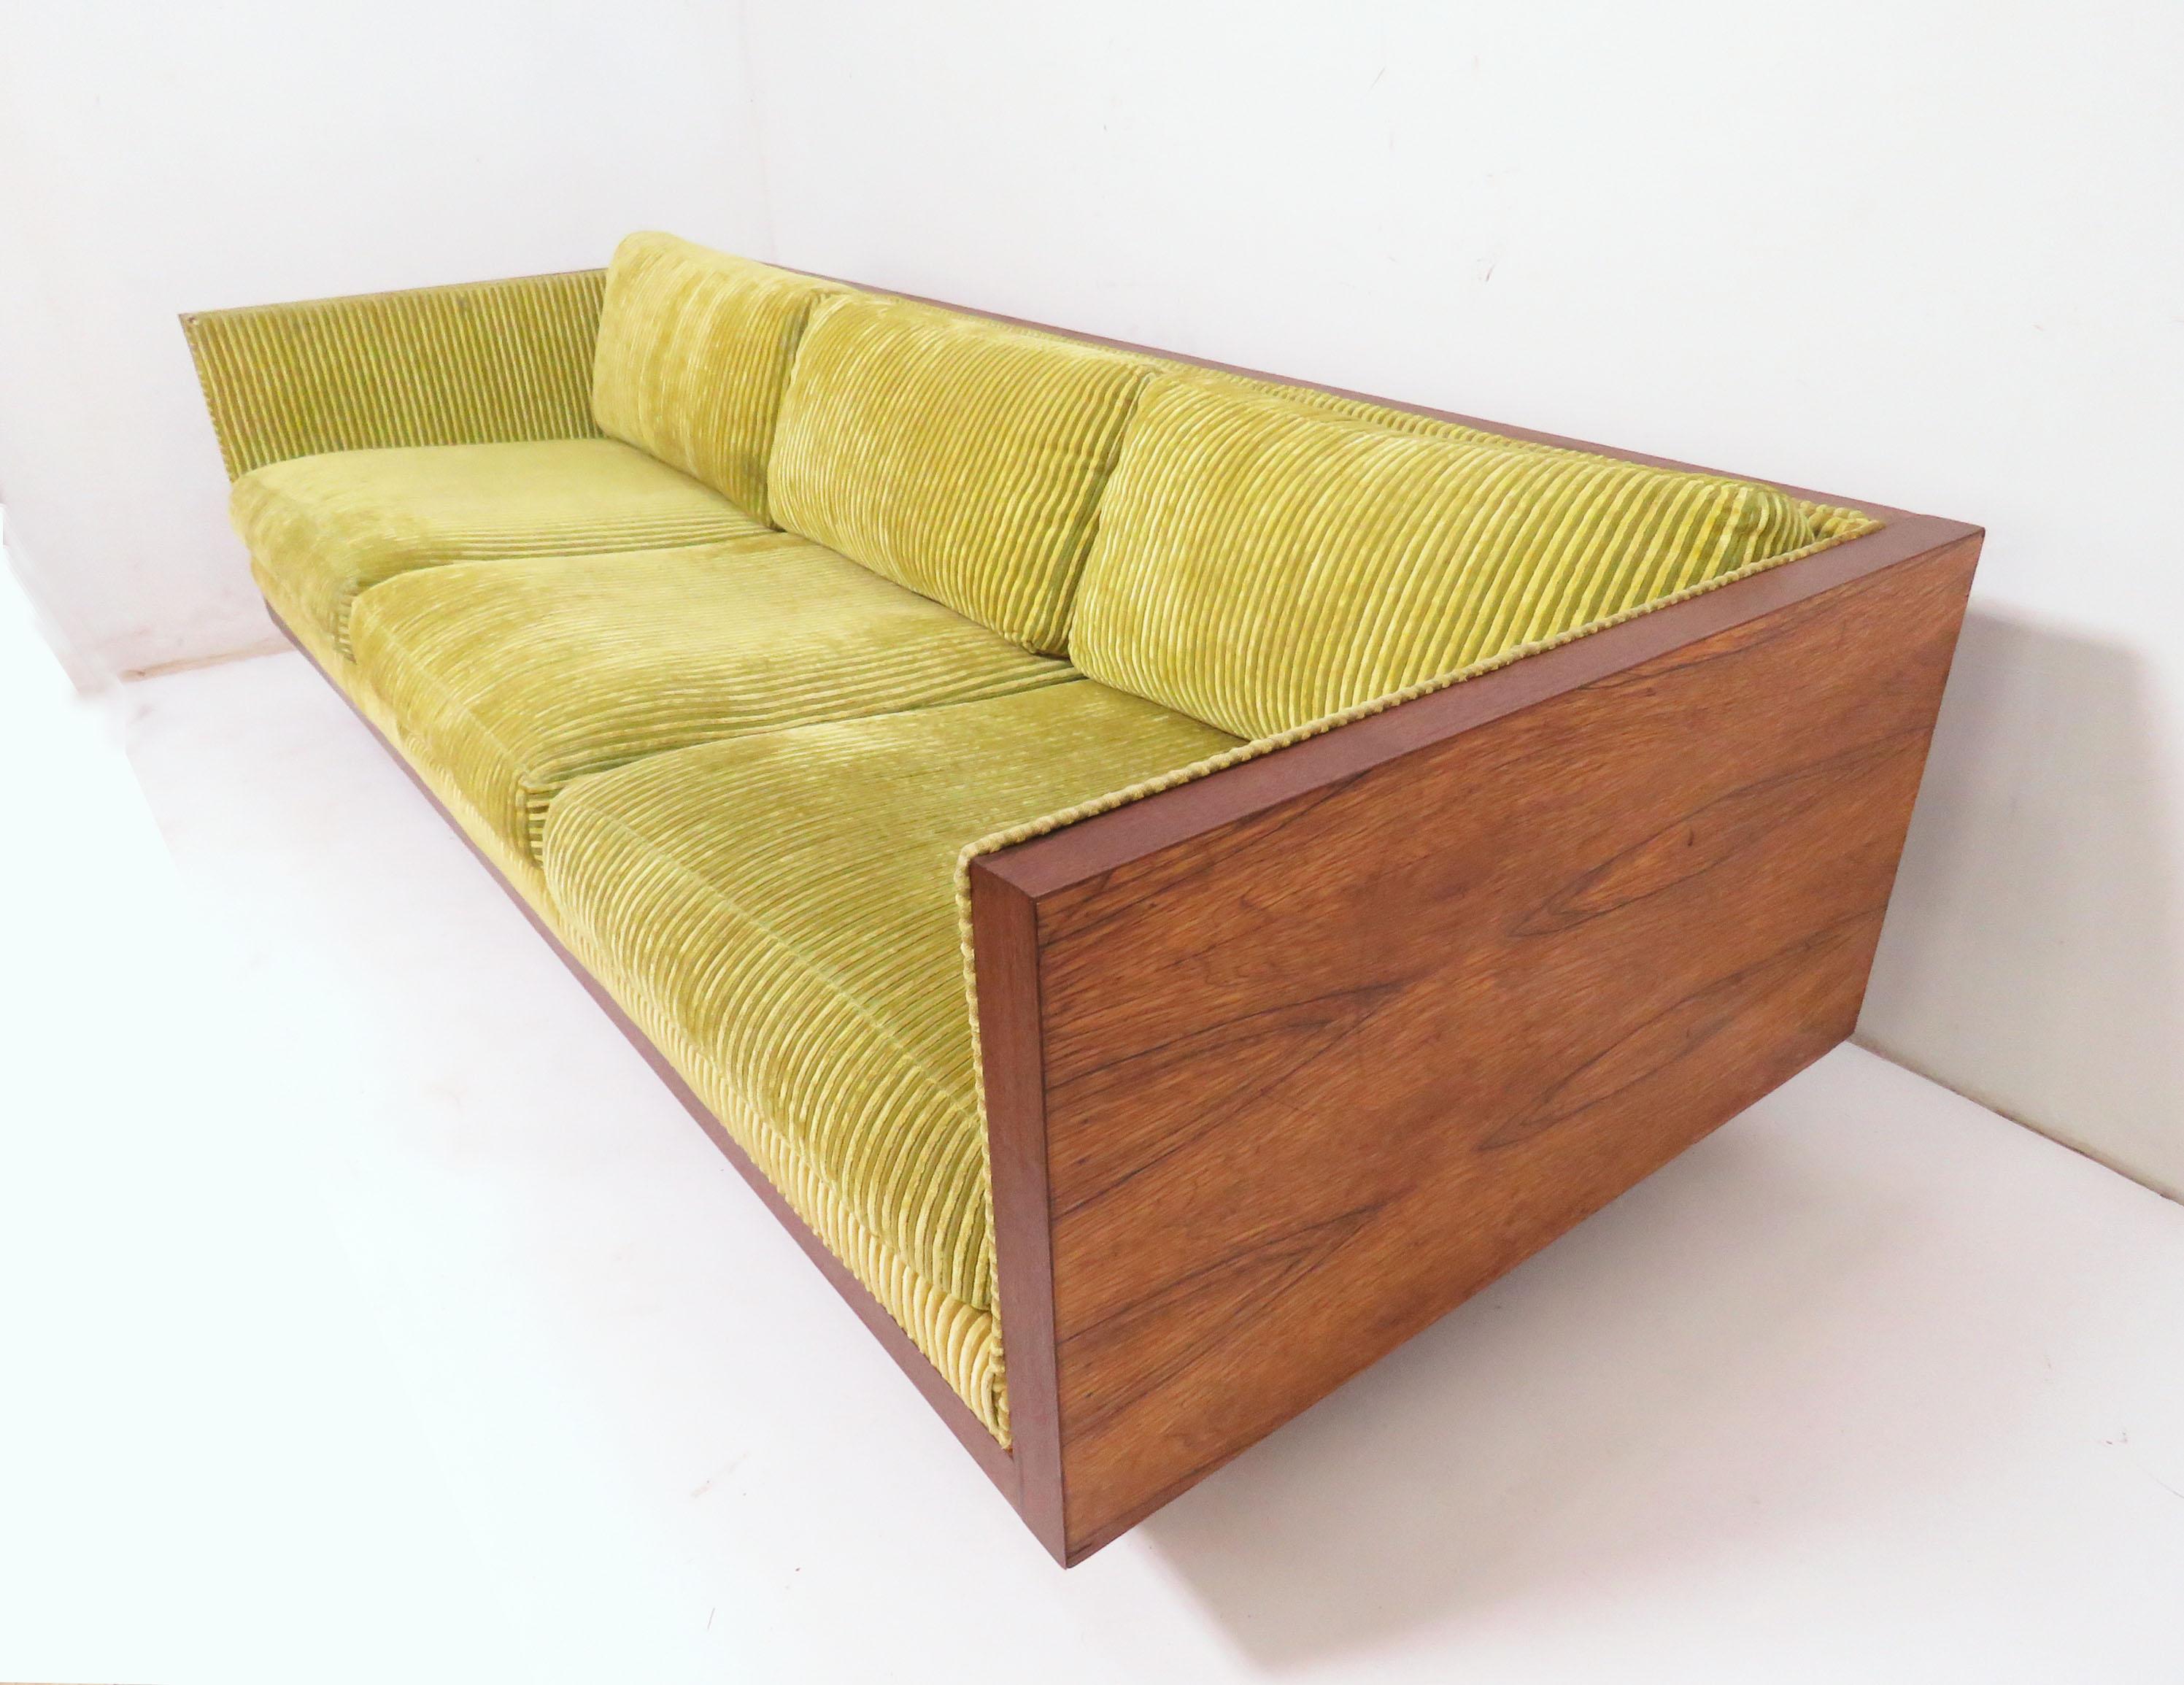 Tuxedo style three-seat sofa in a rosewood cased frame, in the manner of Milo Baughman, circa 1970s. By Charlton Furniture, USA, imported from Israel.

Case measures 85.75